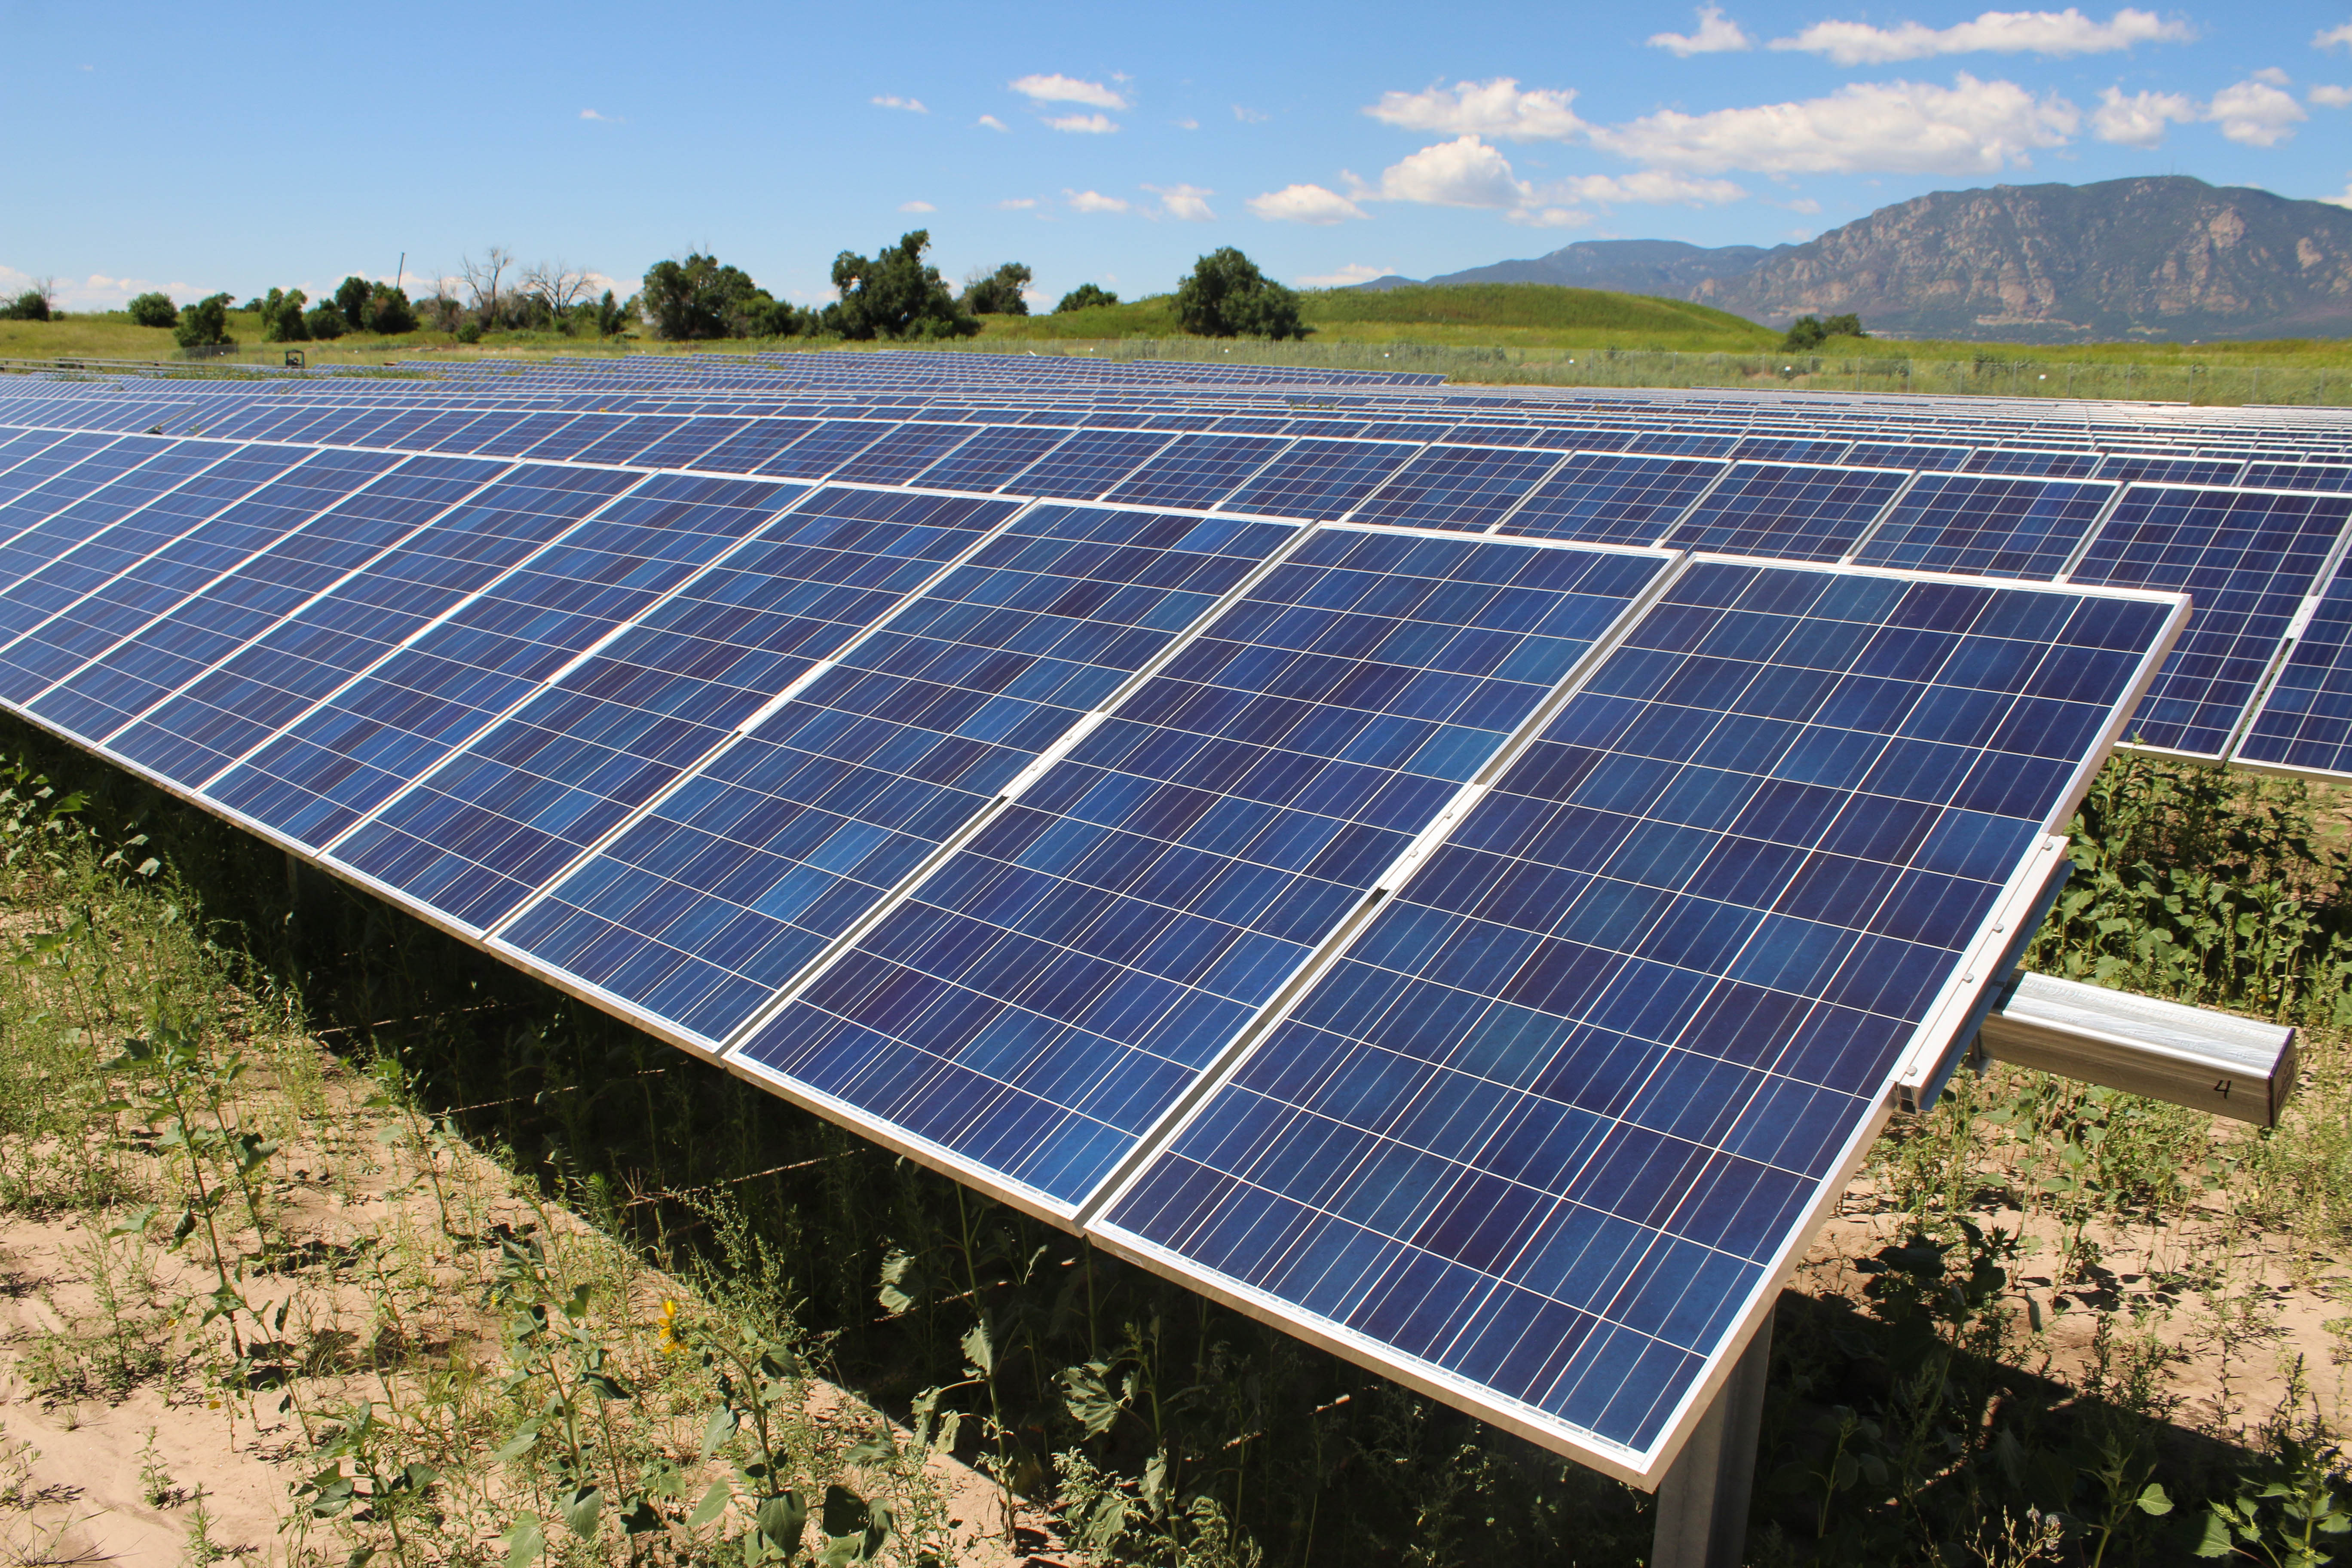 SunShare Takes the Lead in Community Solar, First to Surpass 100 MW of Community Solar Projects